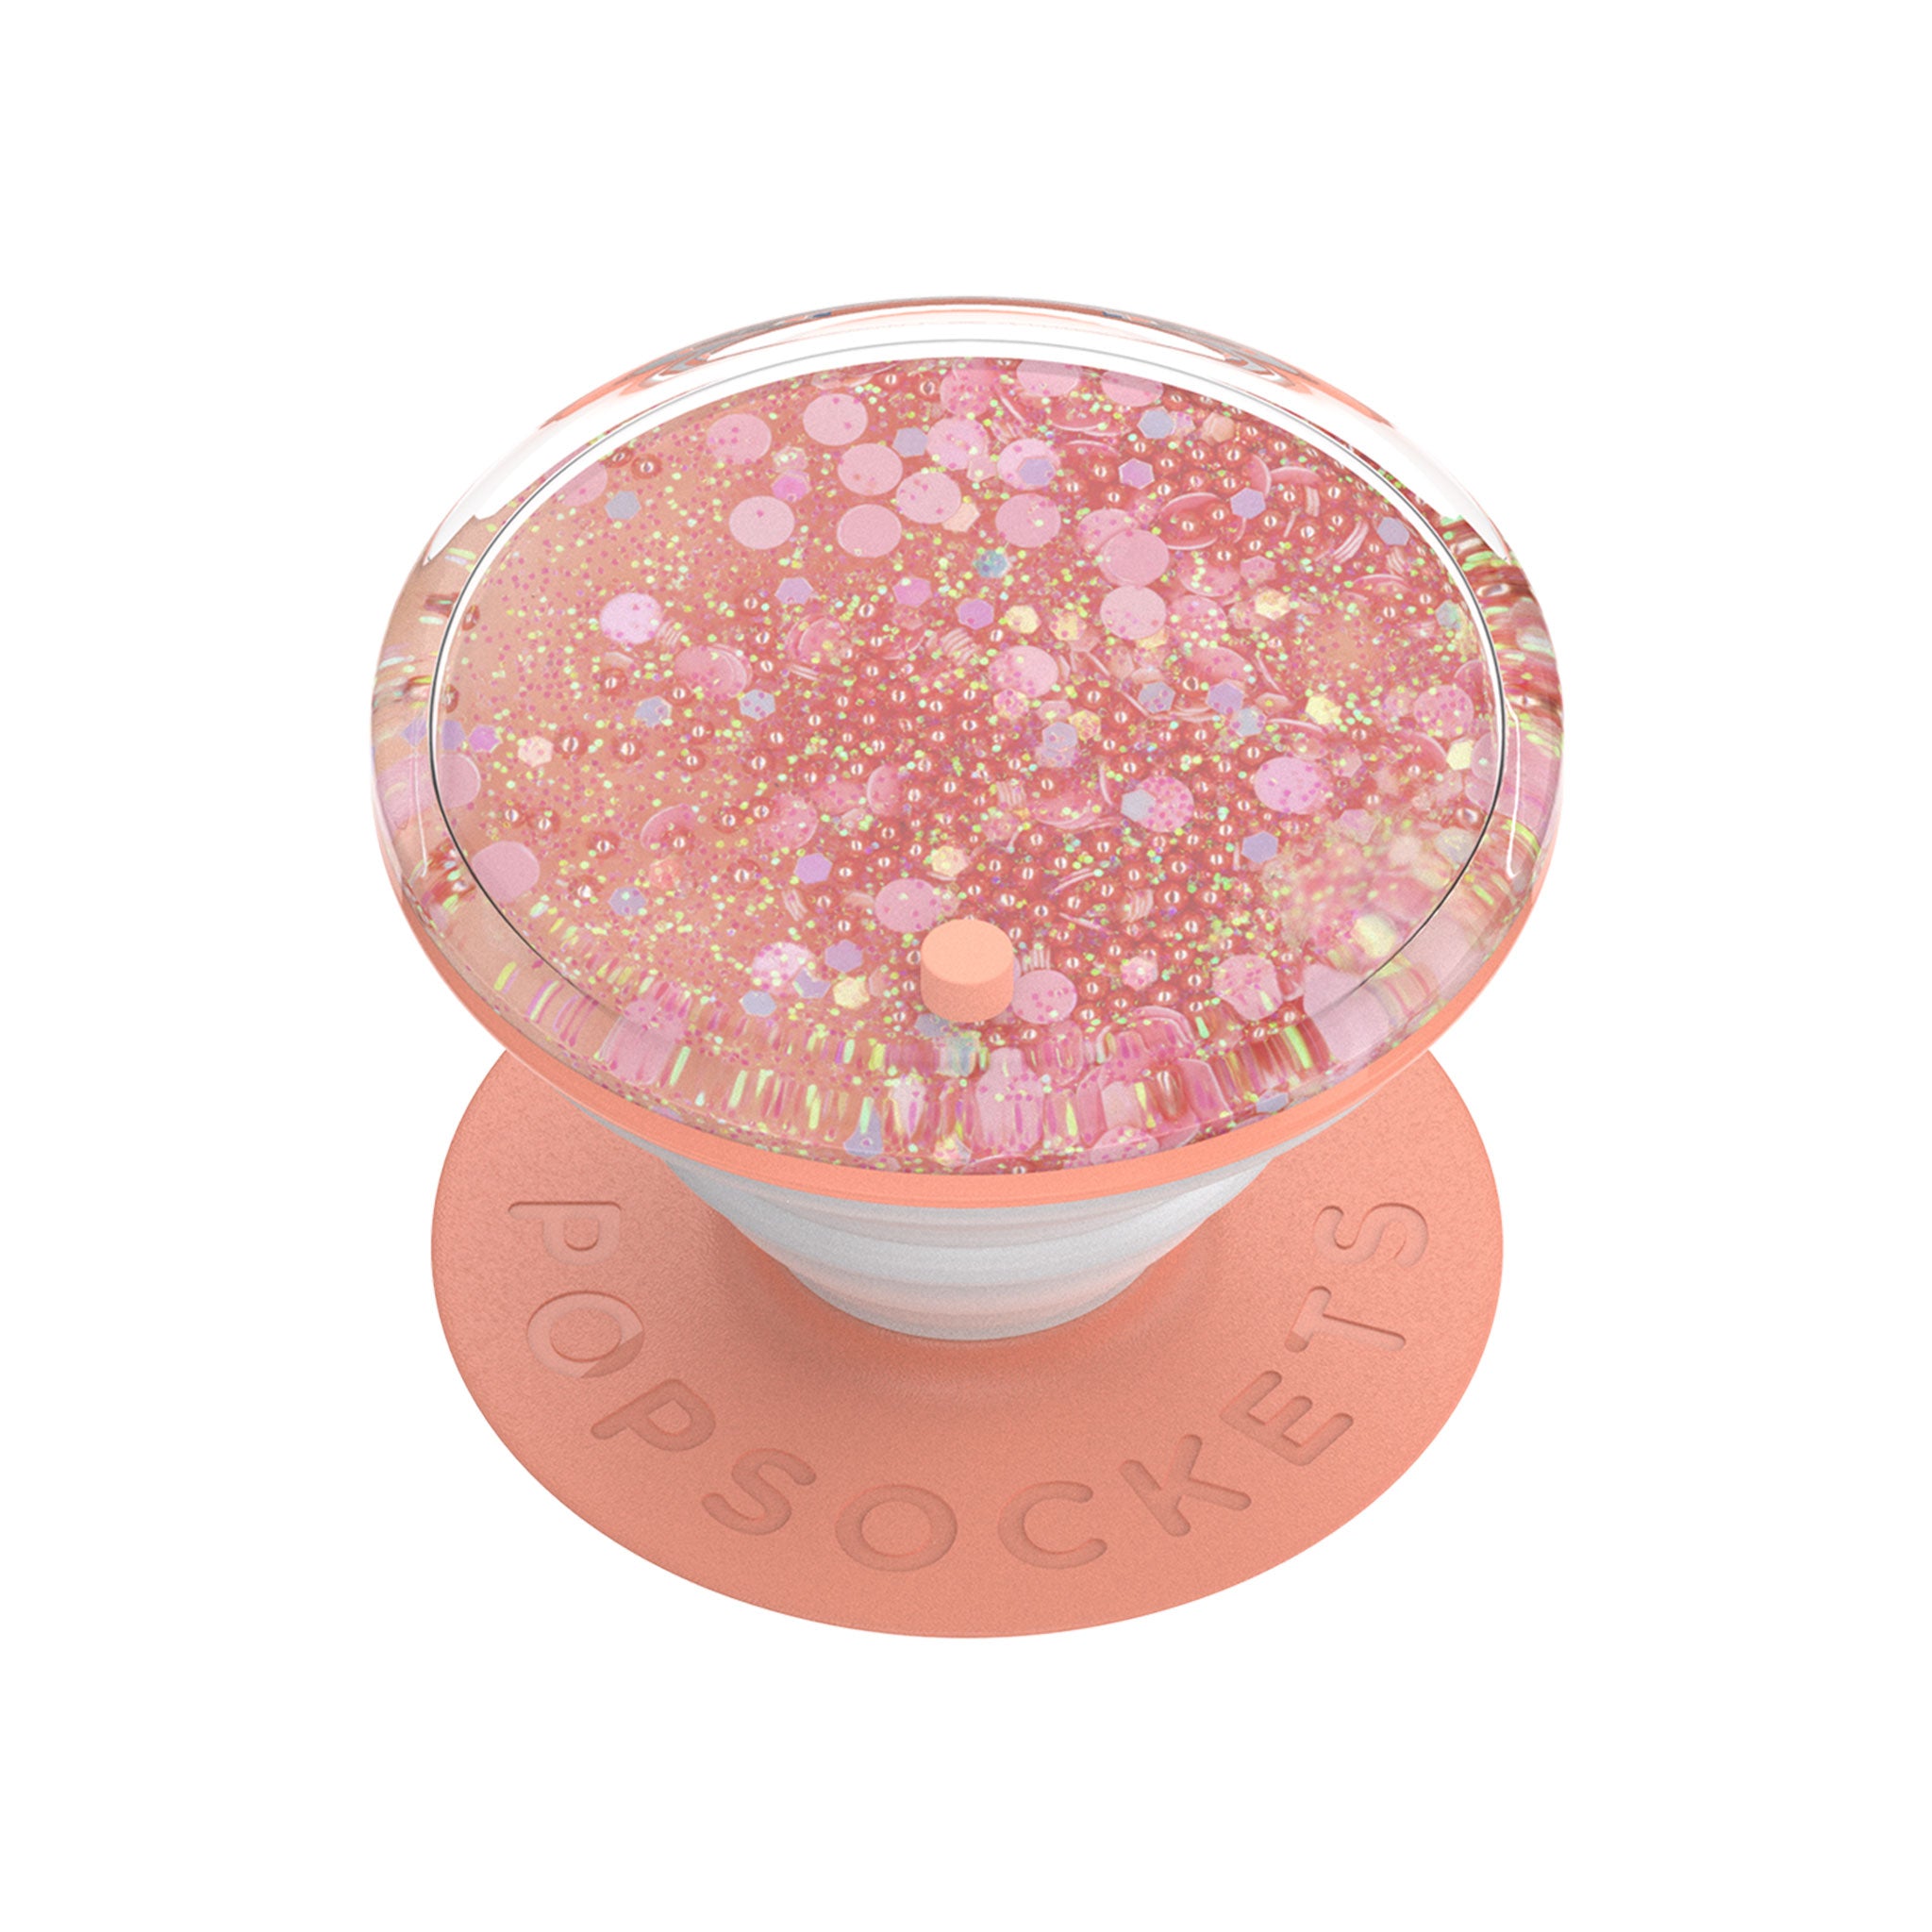 Popsockets - Popgrip Luxe - Tidepool Peachy Pink